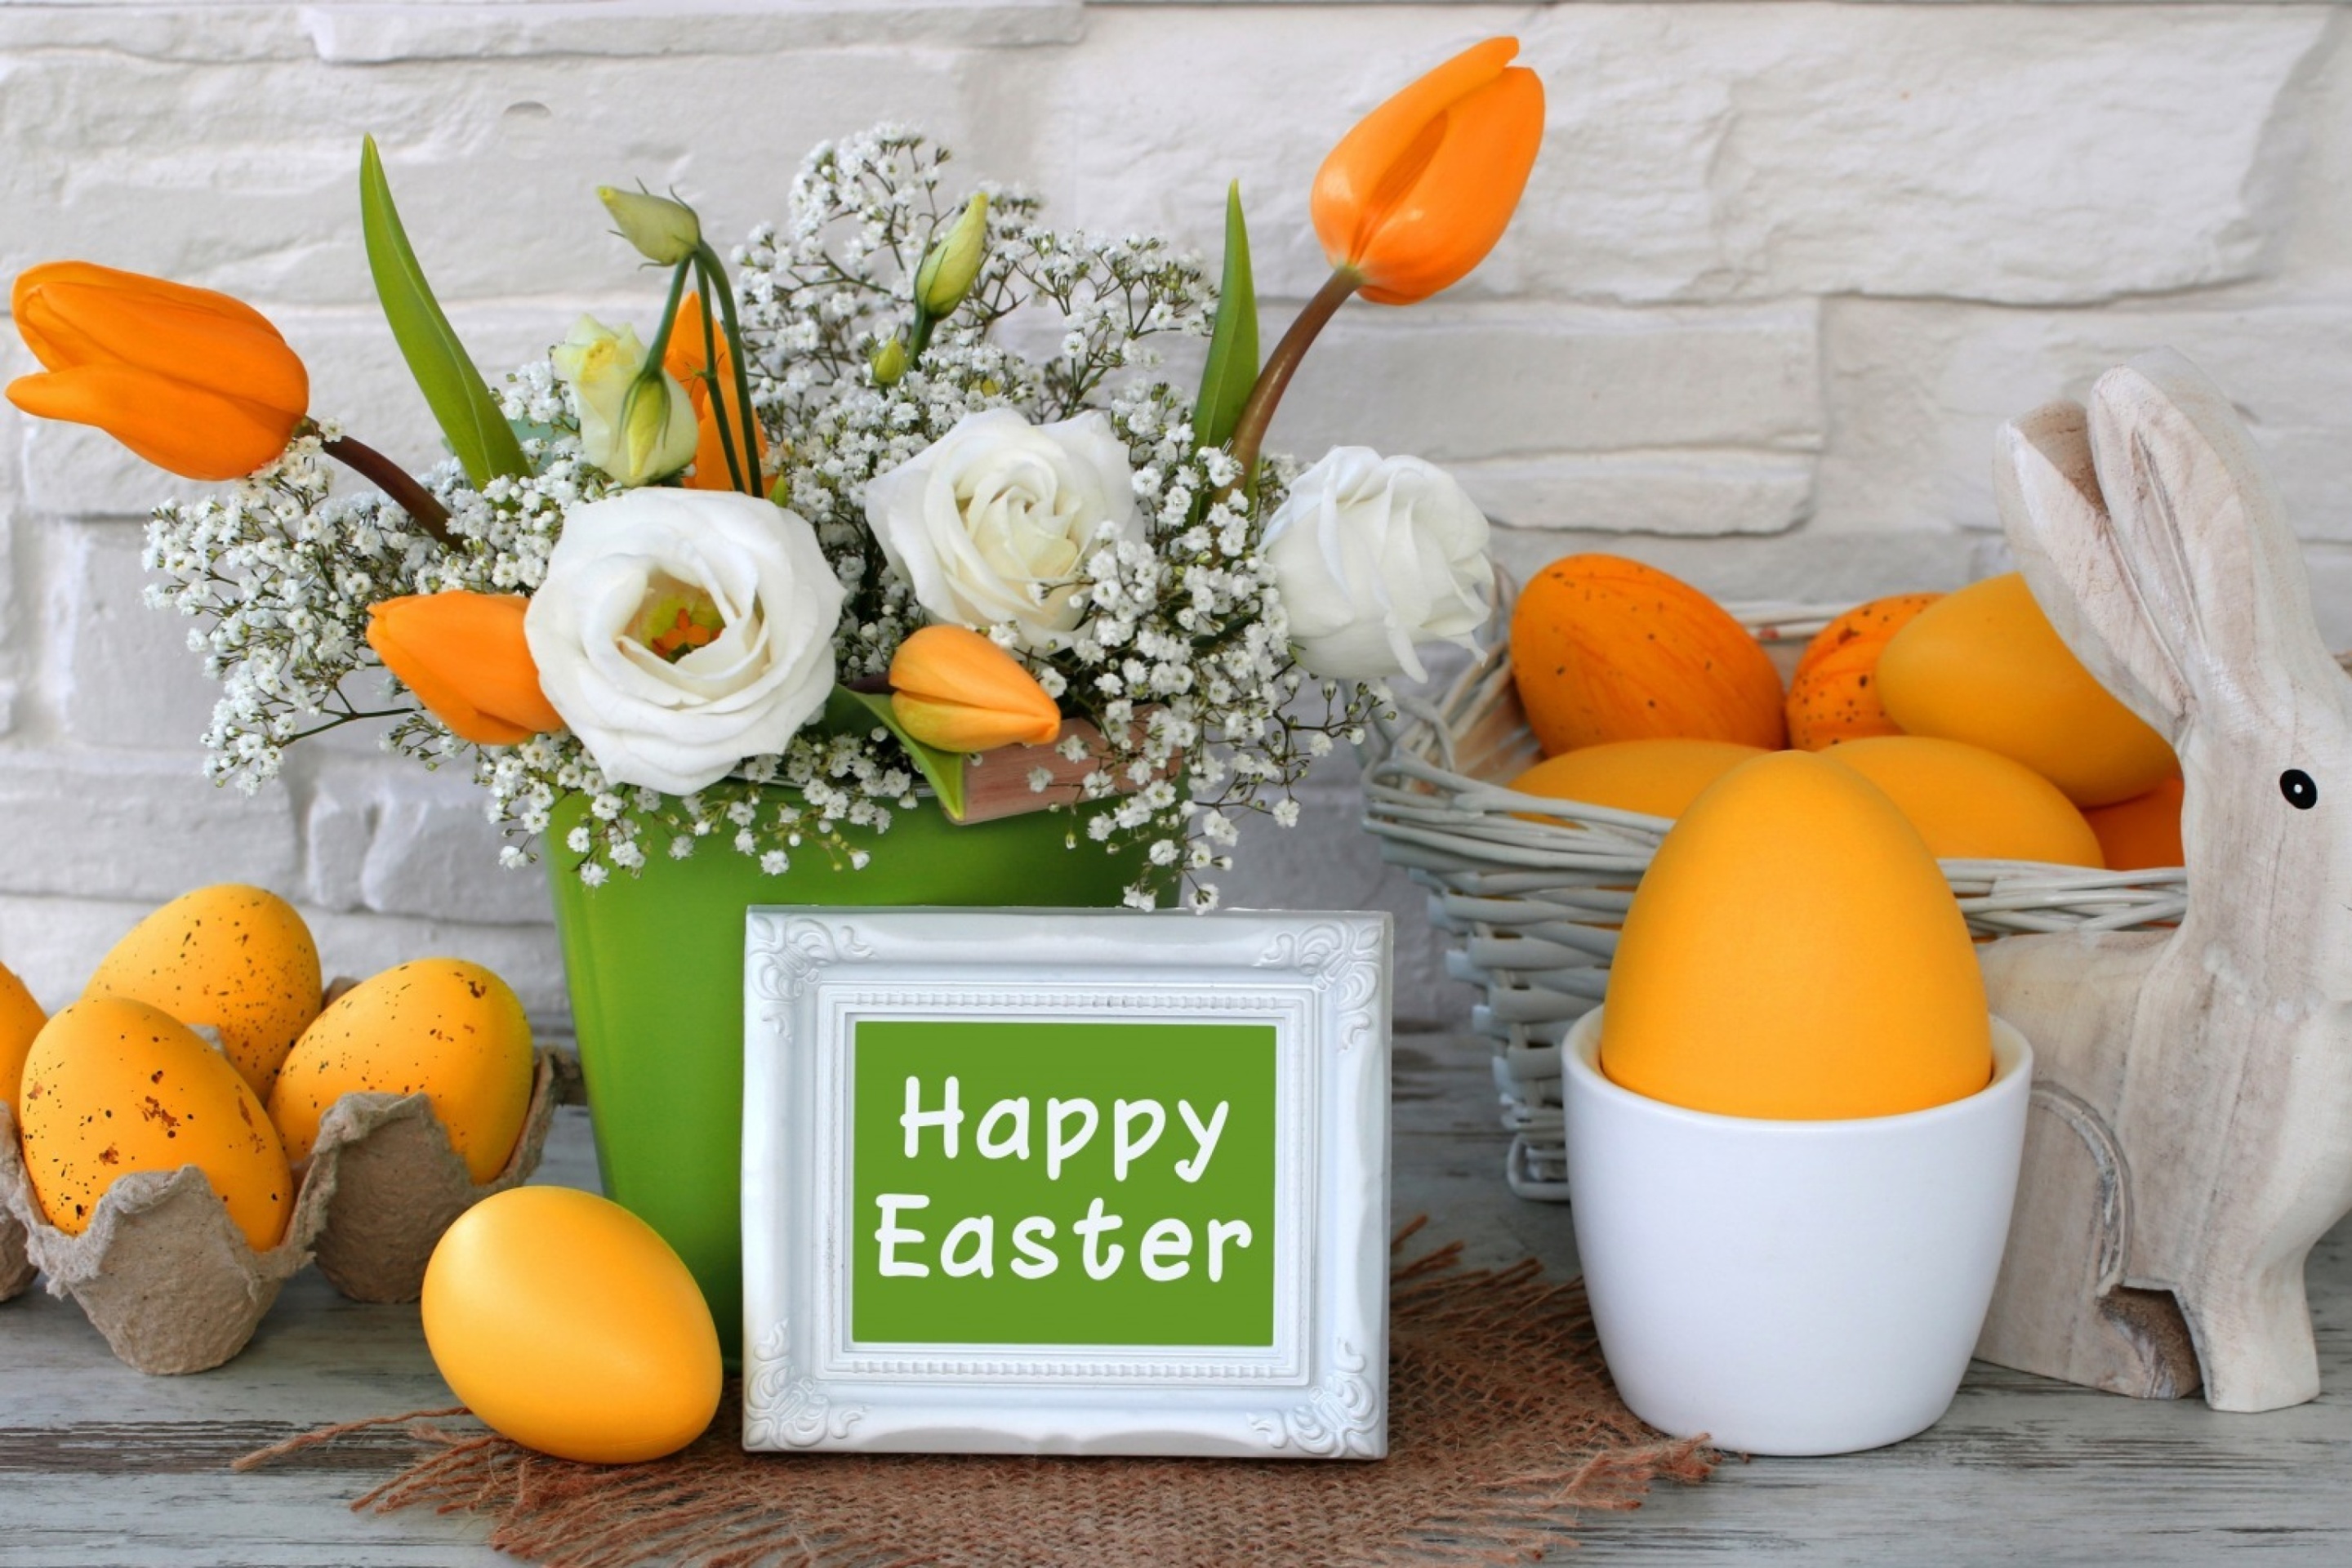 Easter decoration with yellow eggs and bunny screenshot #1 2880x1920